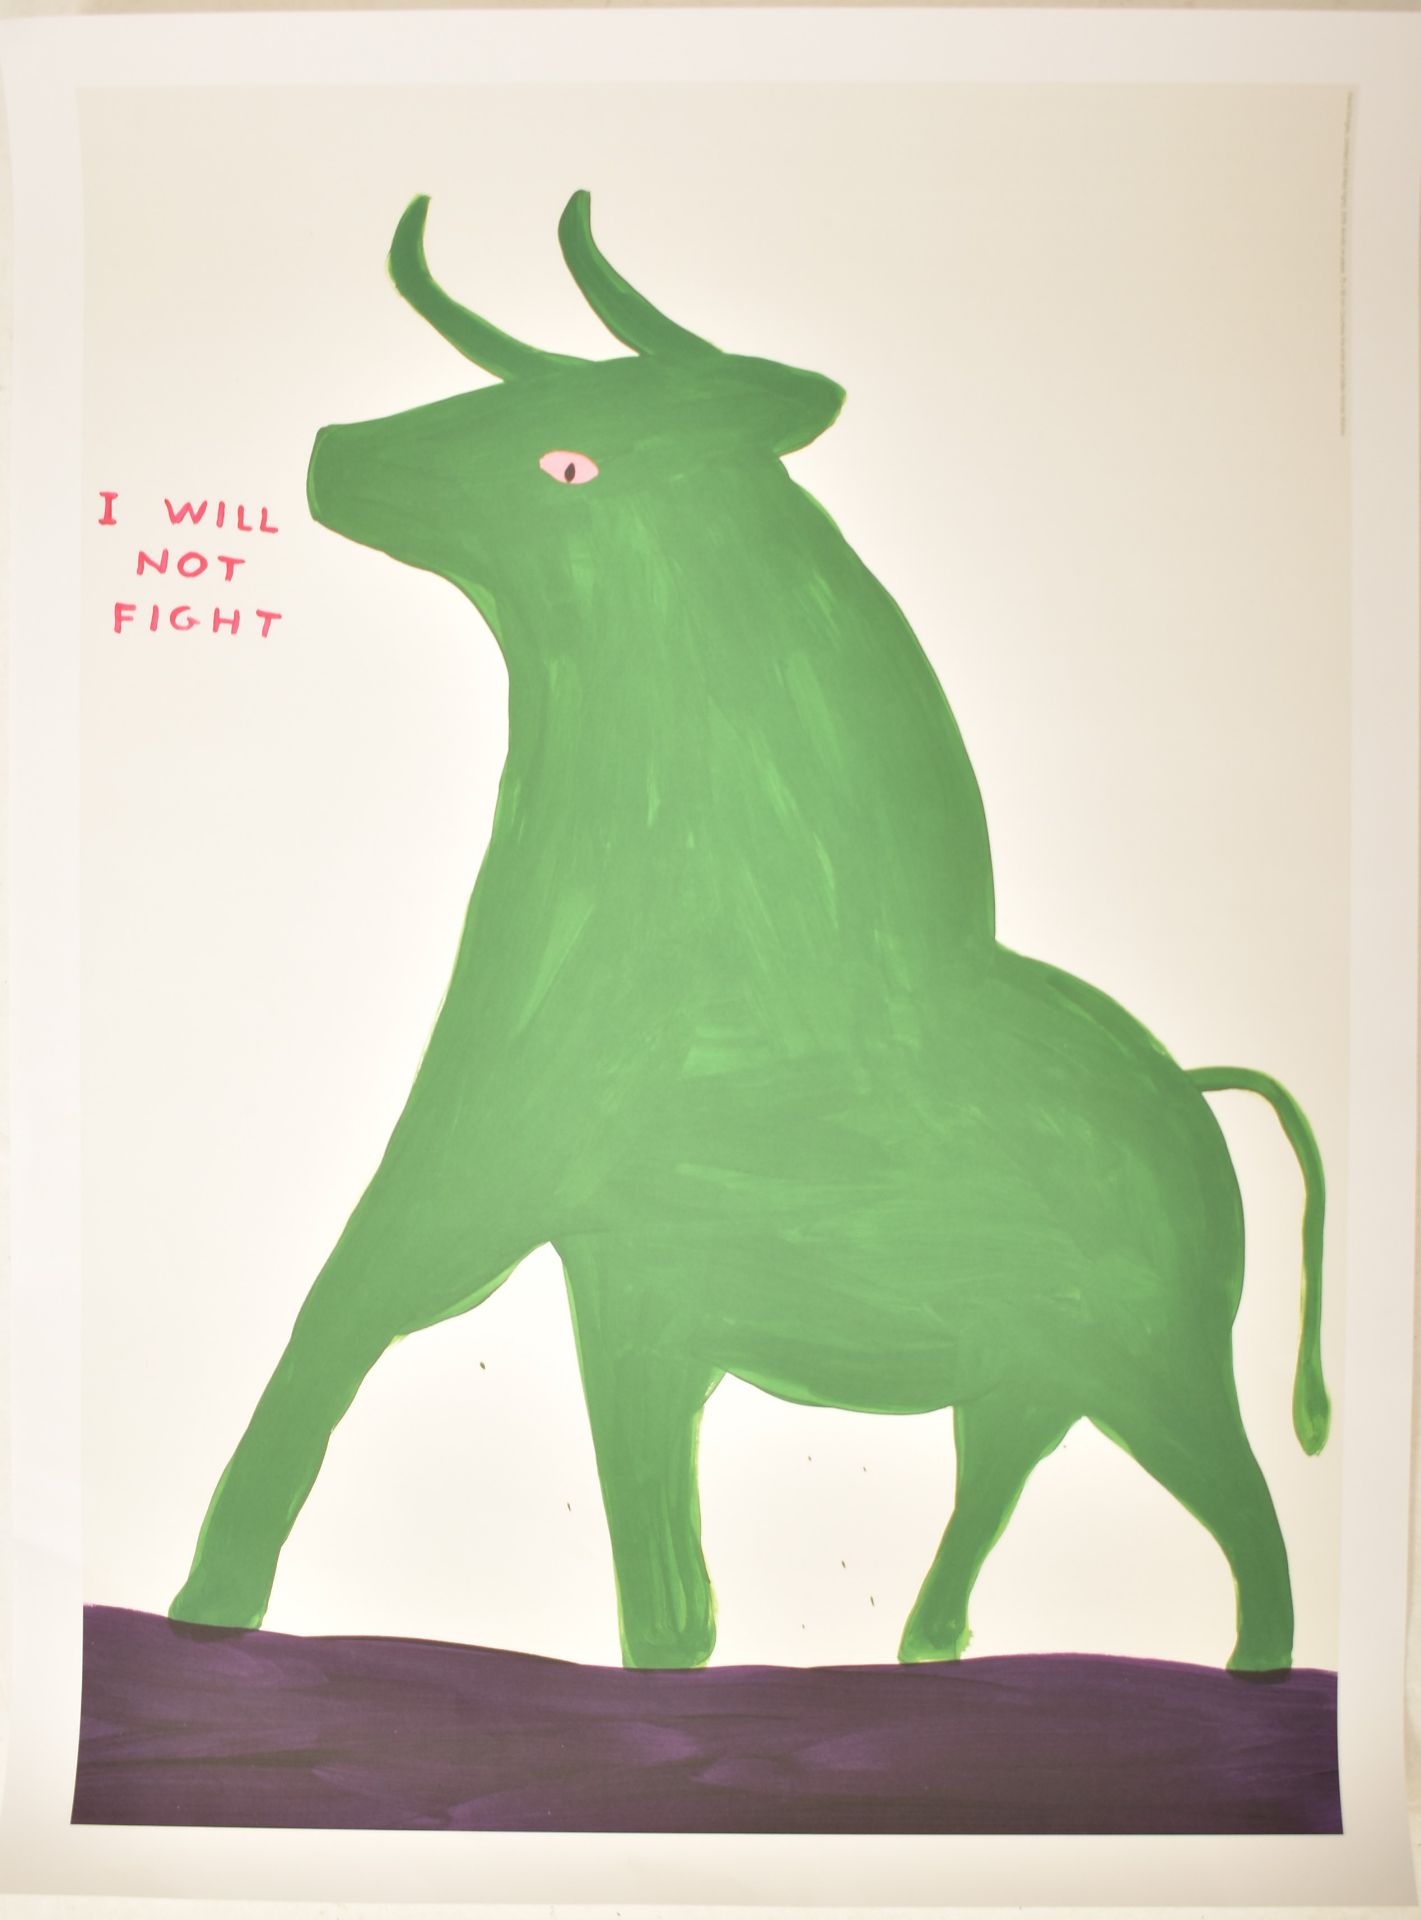 TWO DAVID SHRIGLEY 2020 OFFSET LITHOGRAPHS FROM ANIMAL SERIES - Image 3 of 4